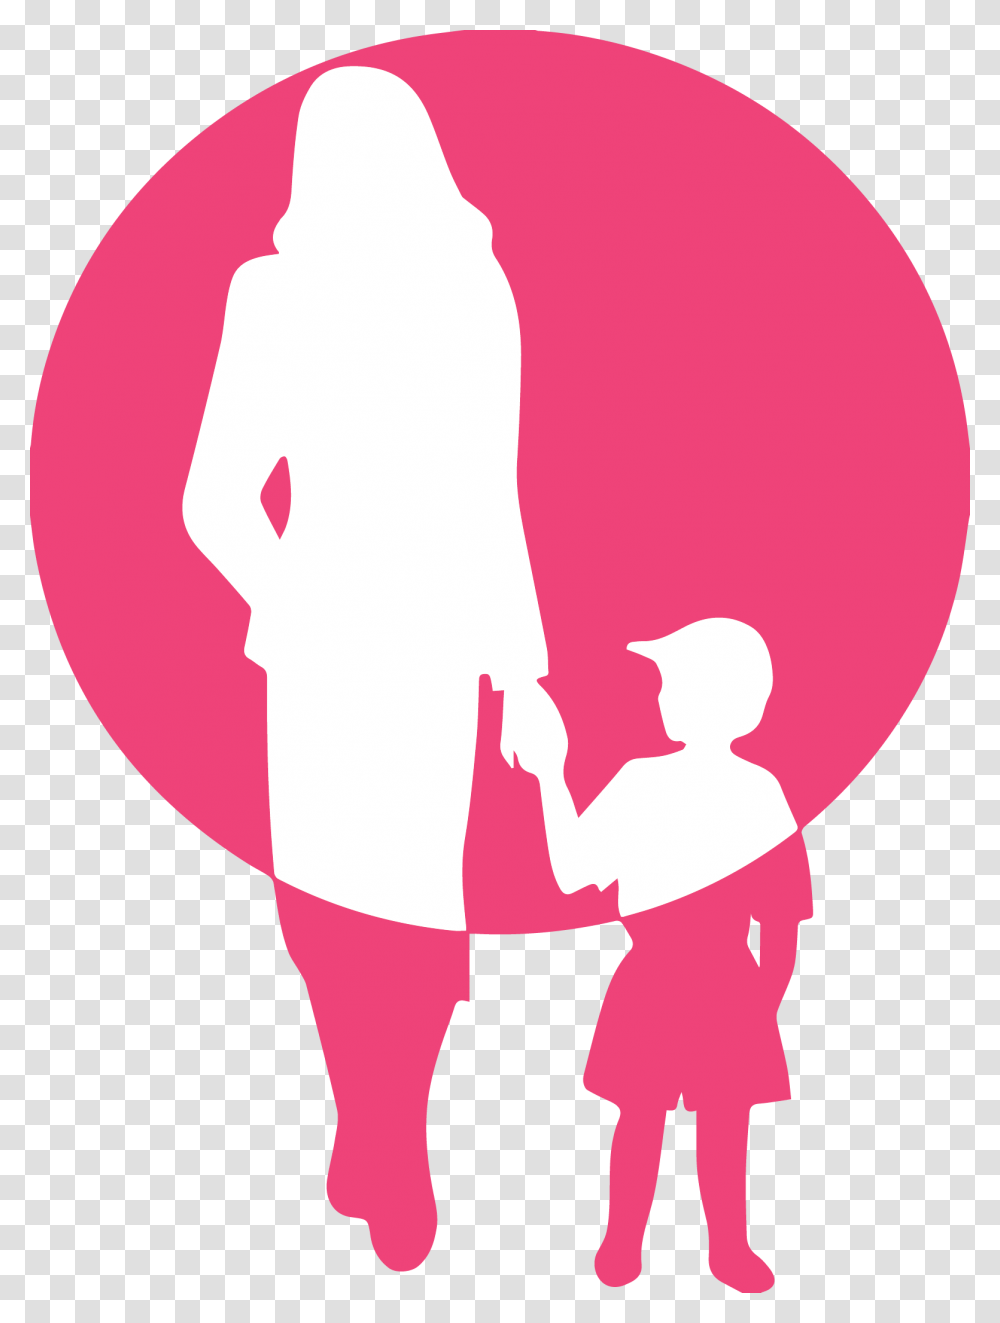 Mother And Son Logo Clipart Download, Hand, Person, Human, Holding Hands Transparent Png